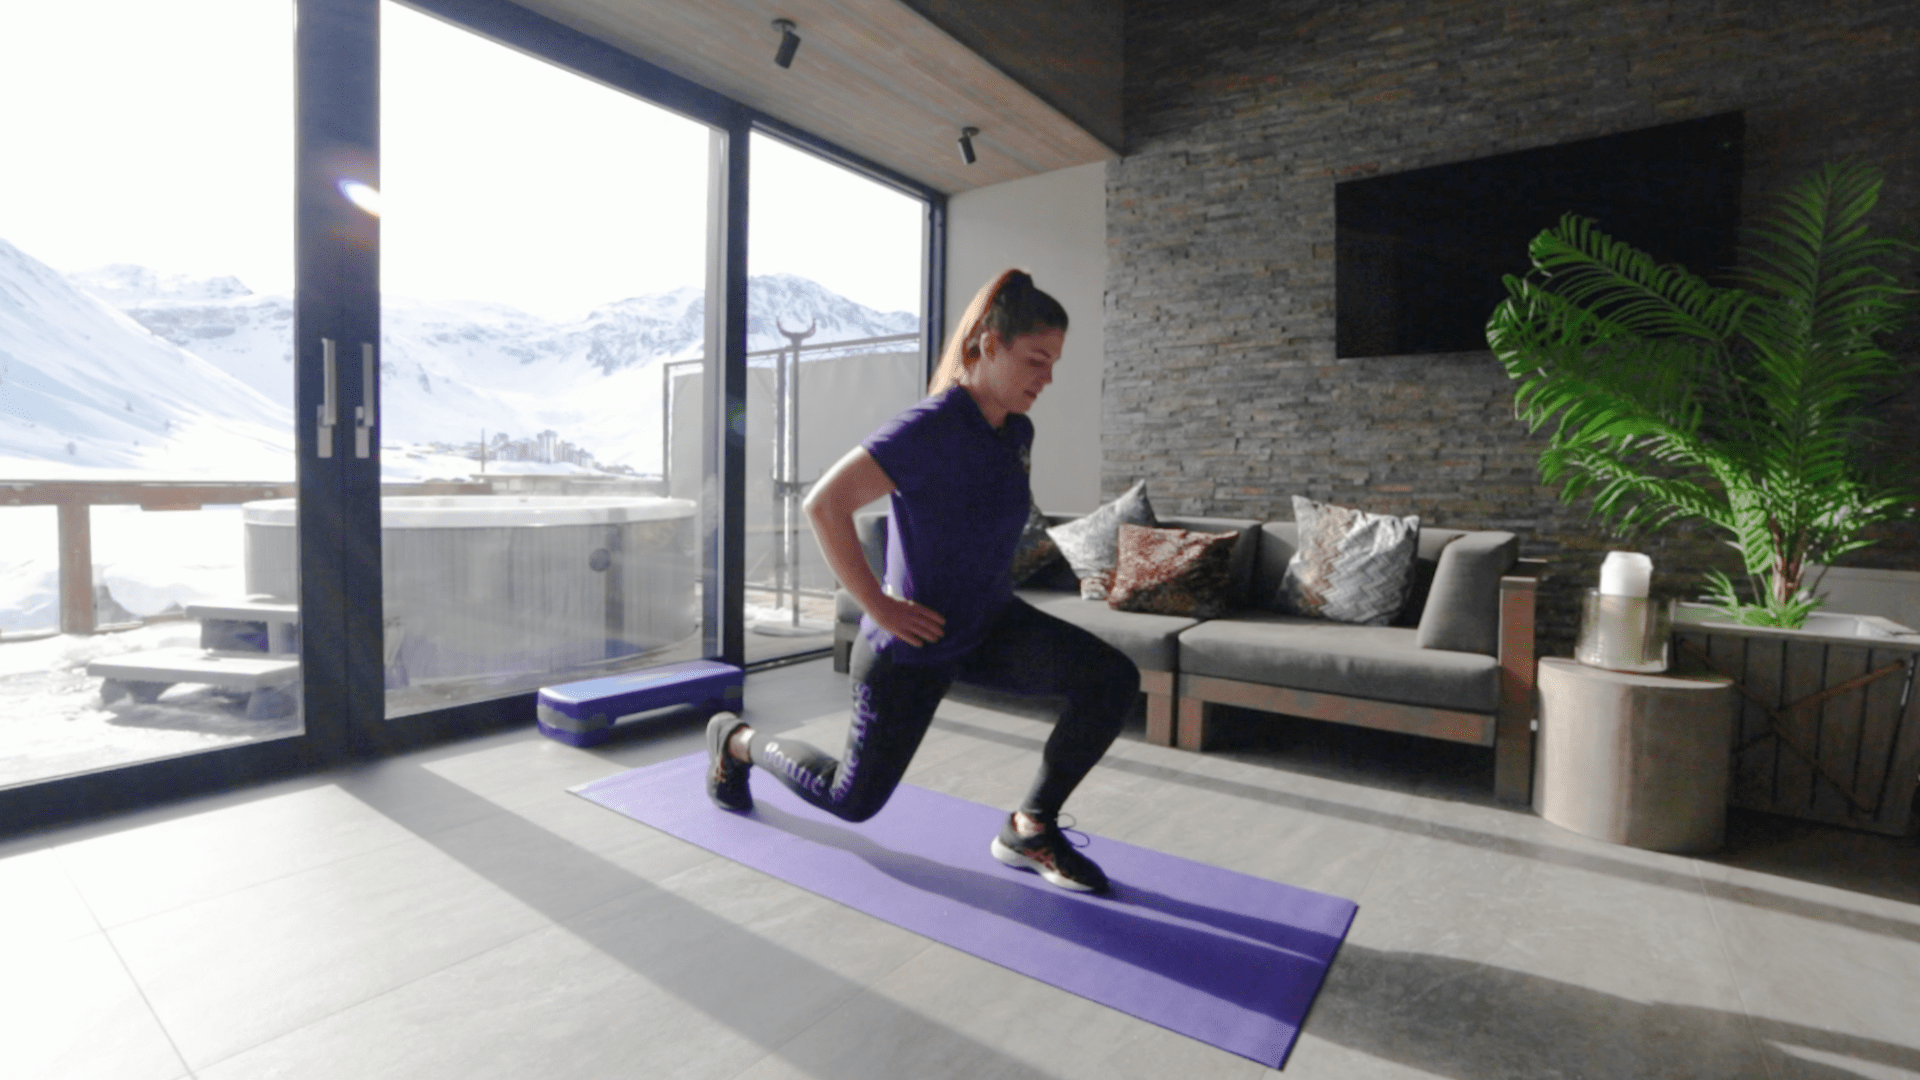 A woman in purple and black gym clothes performs a lunge as part of an at home ski workout